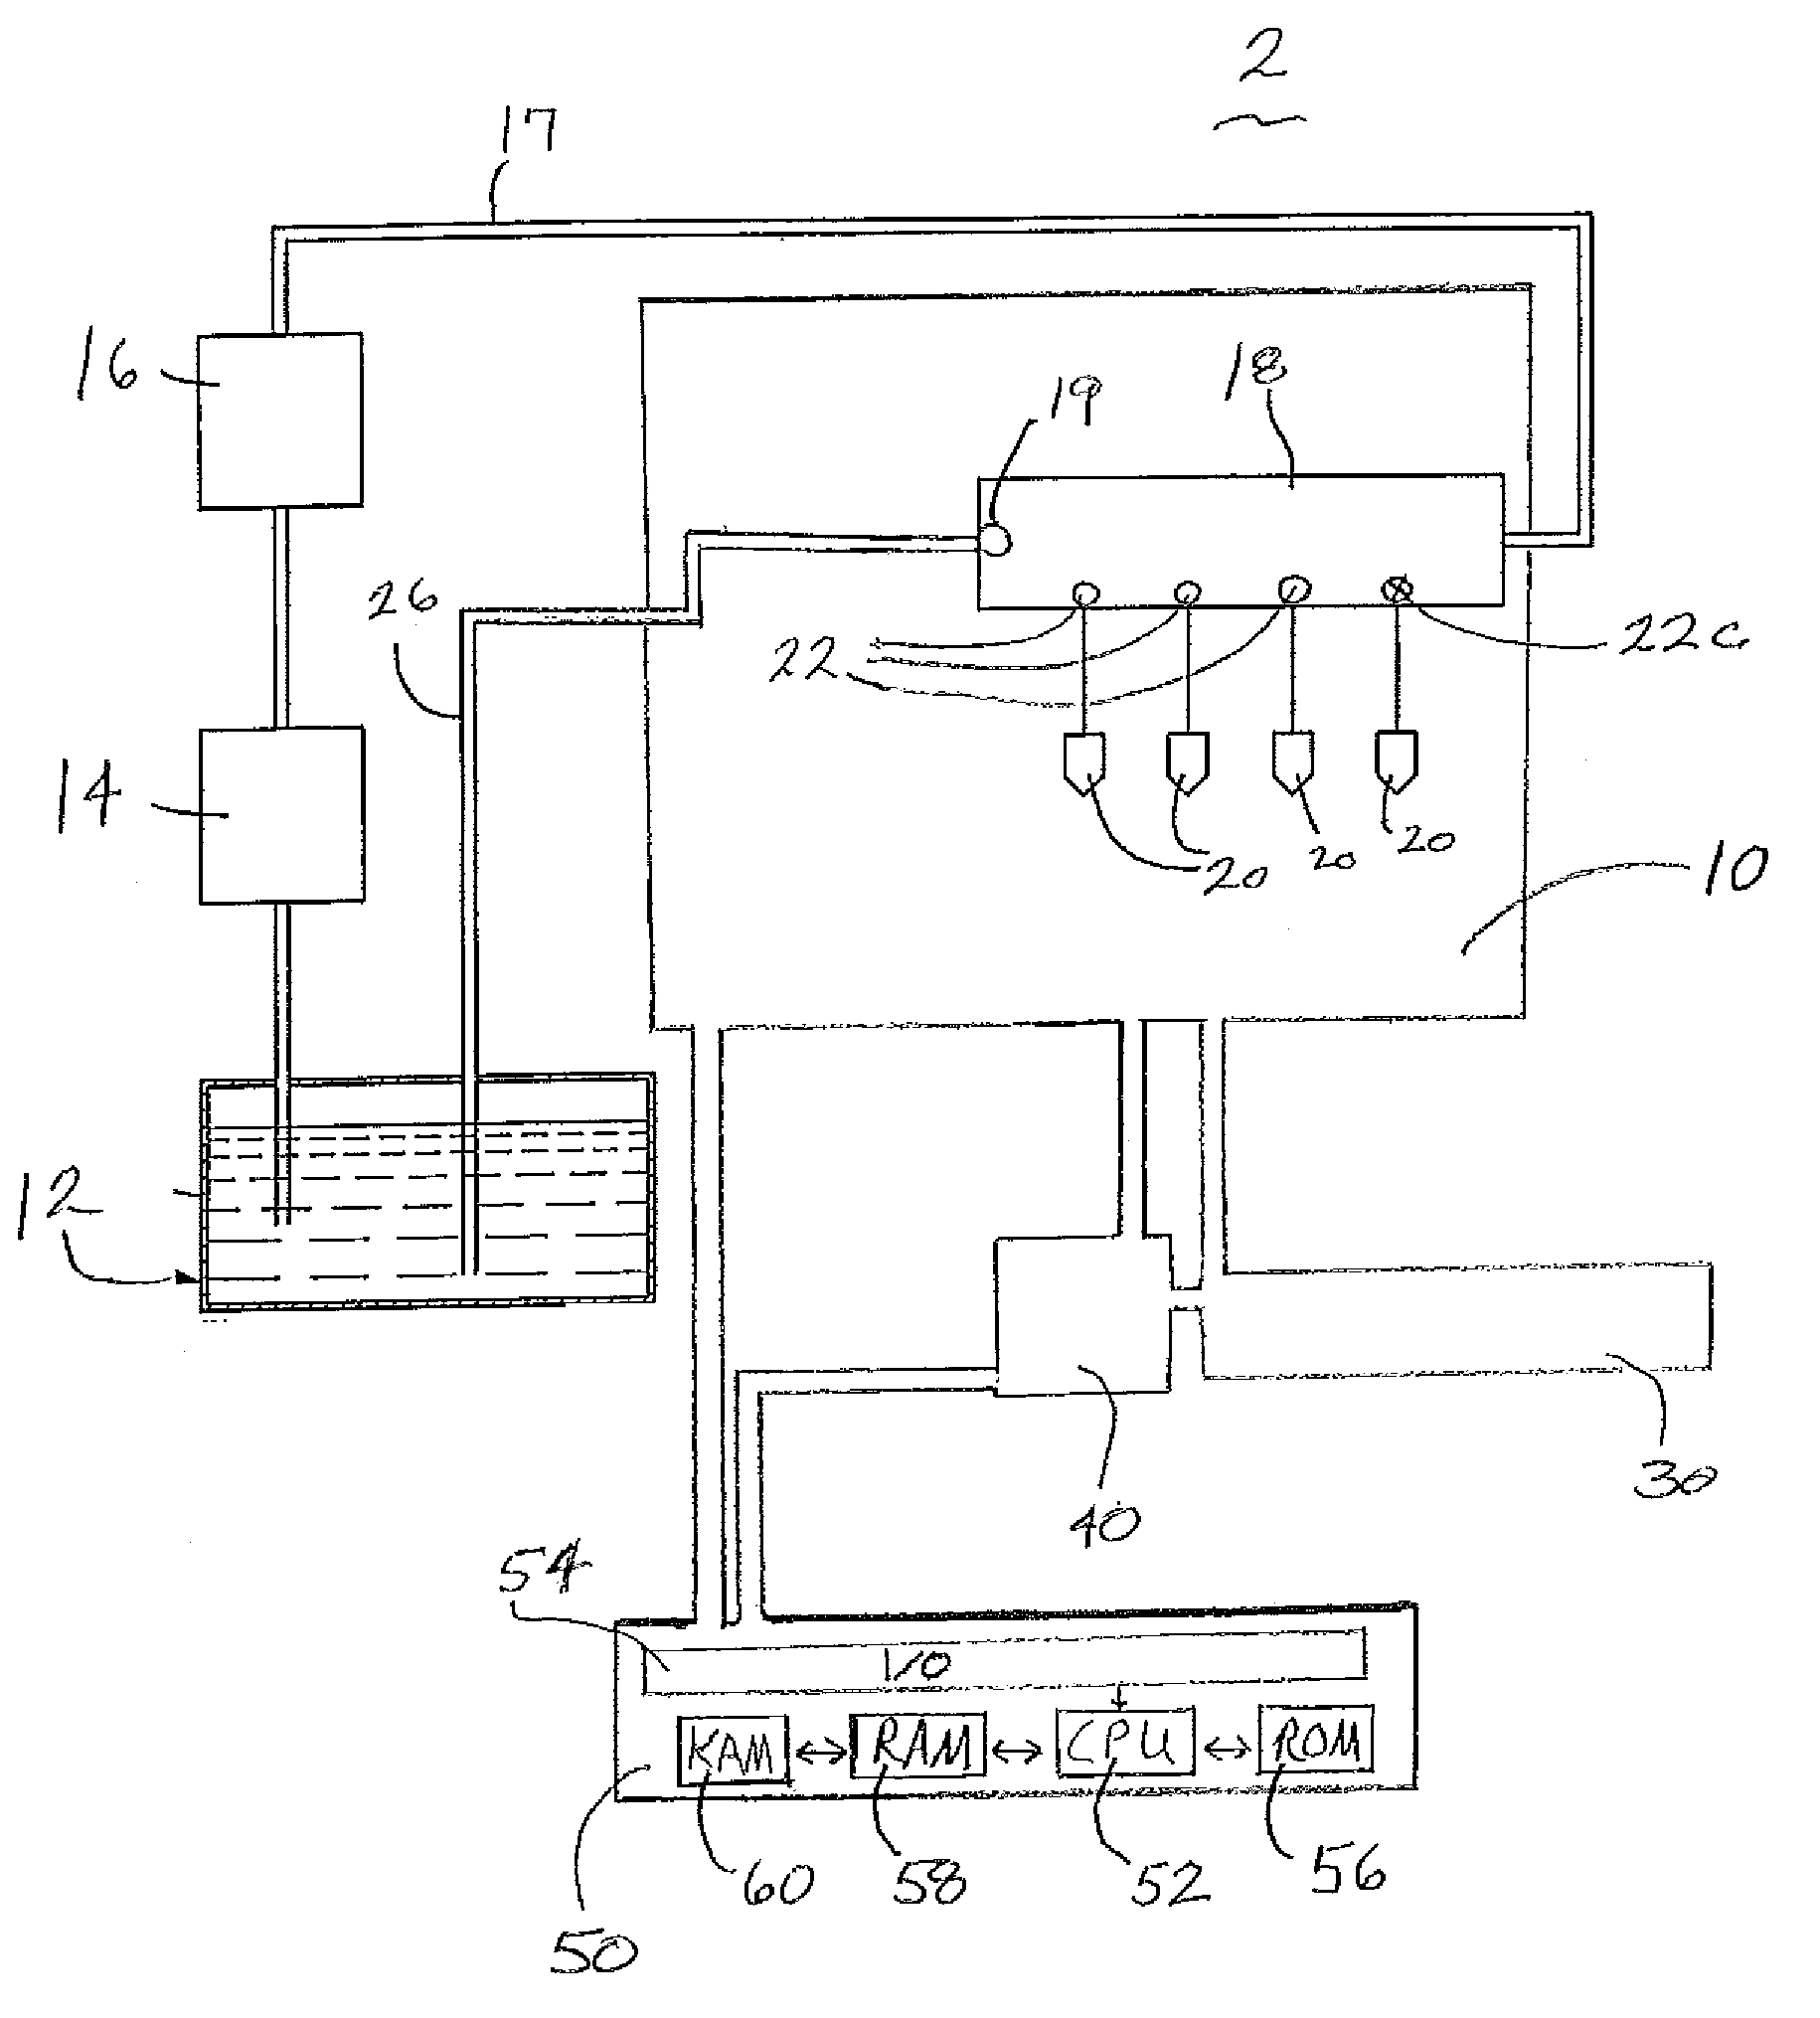 Method and system for conserving fuel in a diesel engine